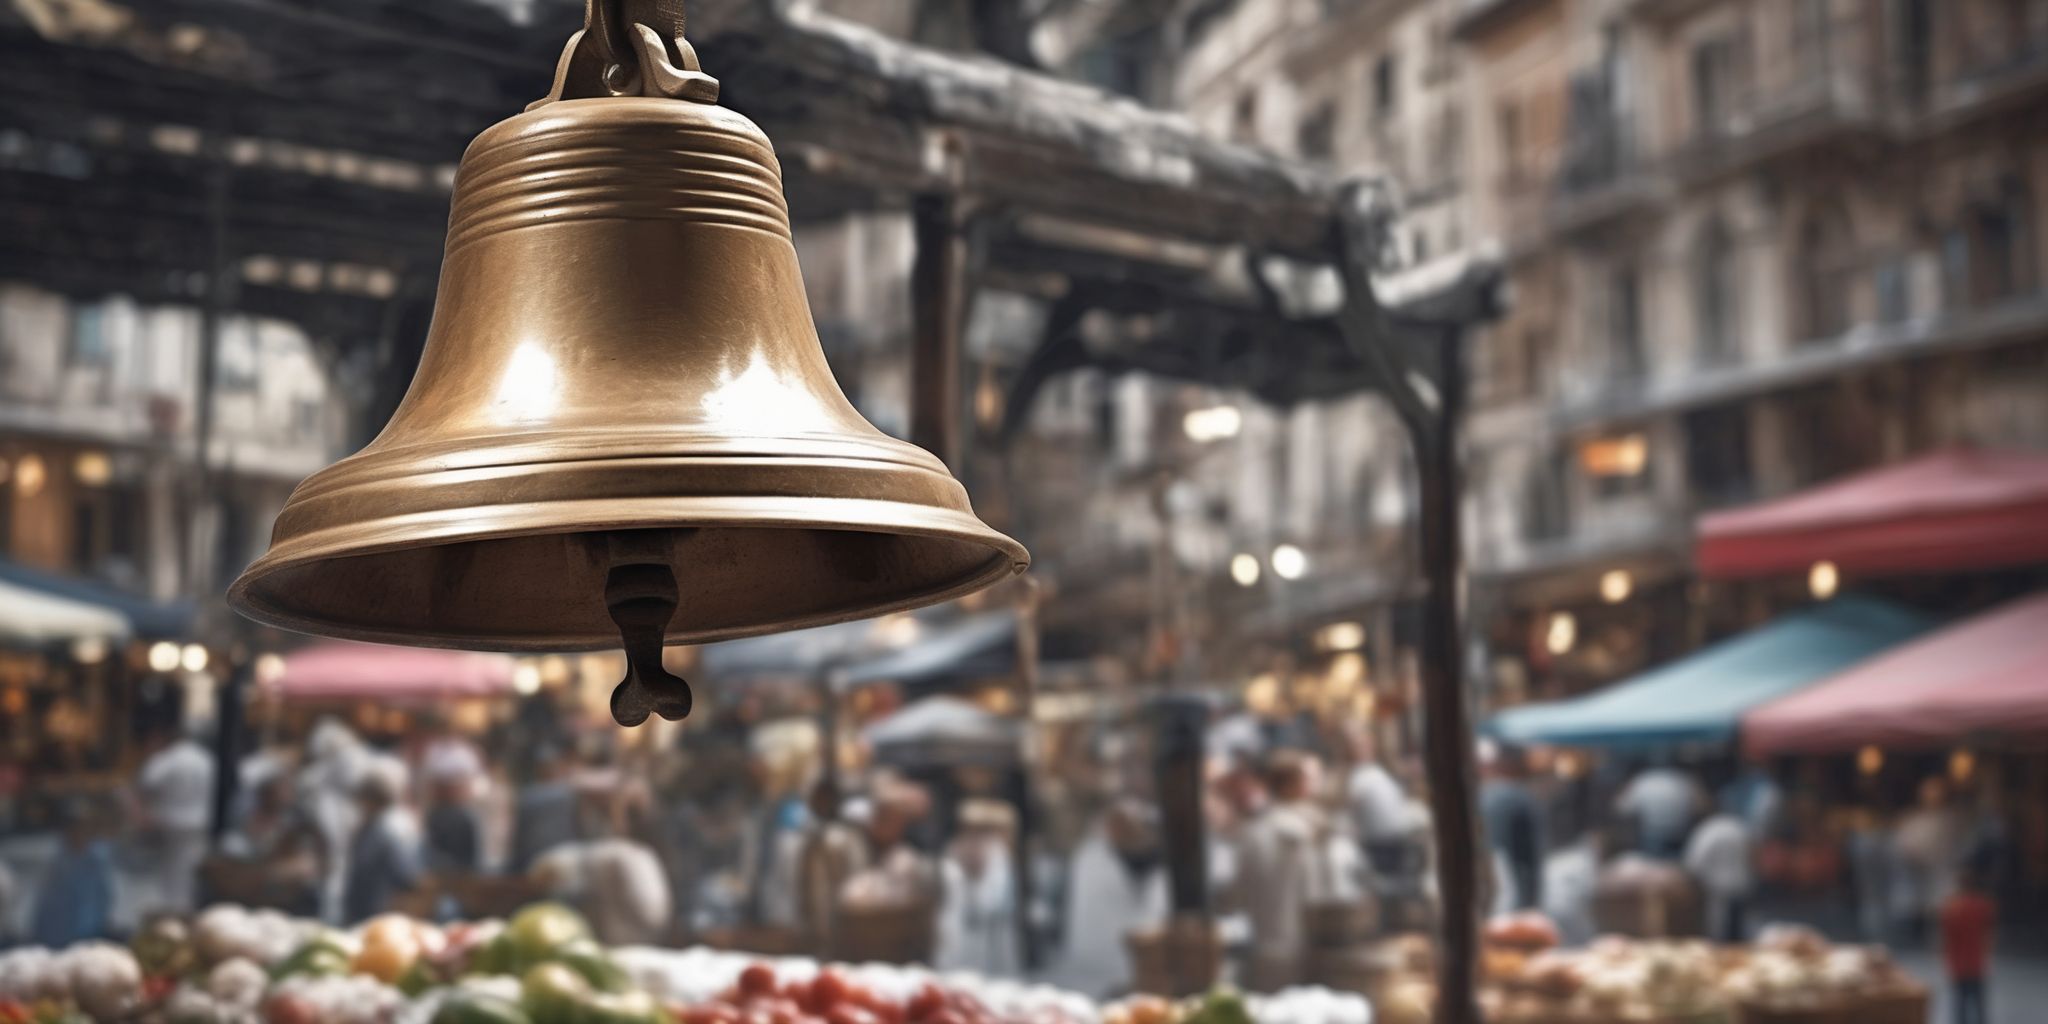 Market bell  in realistic, photographic style